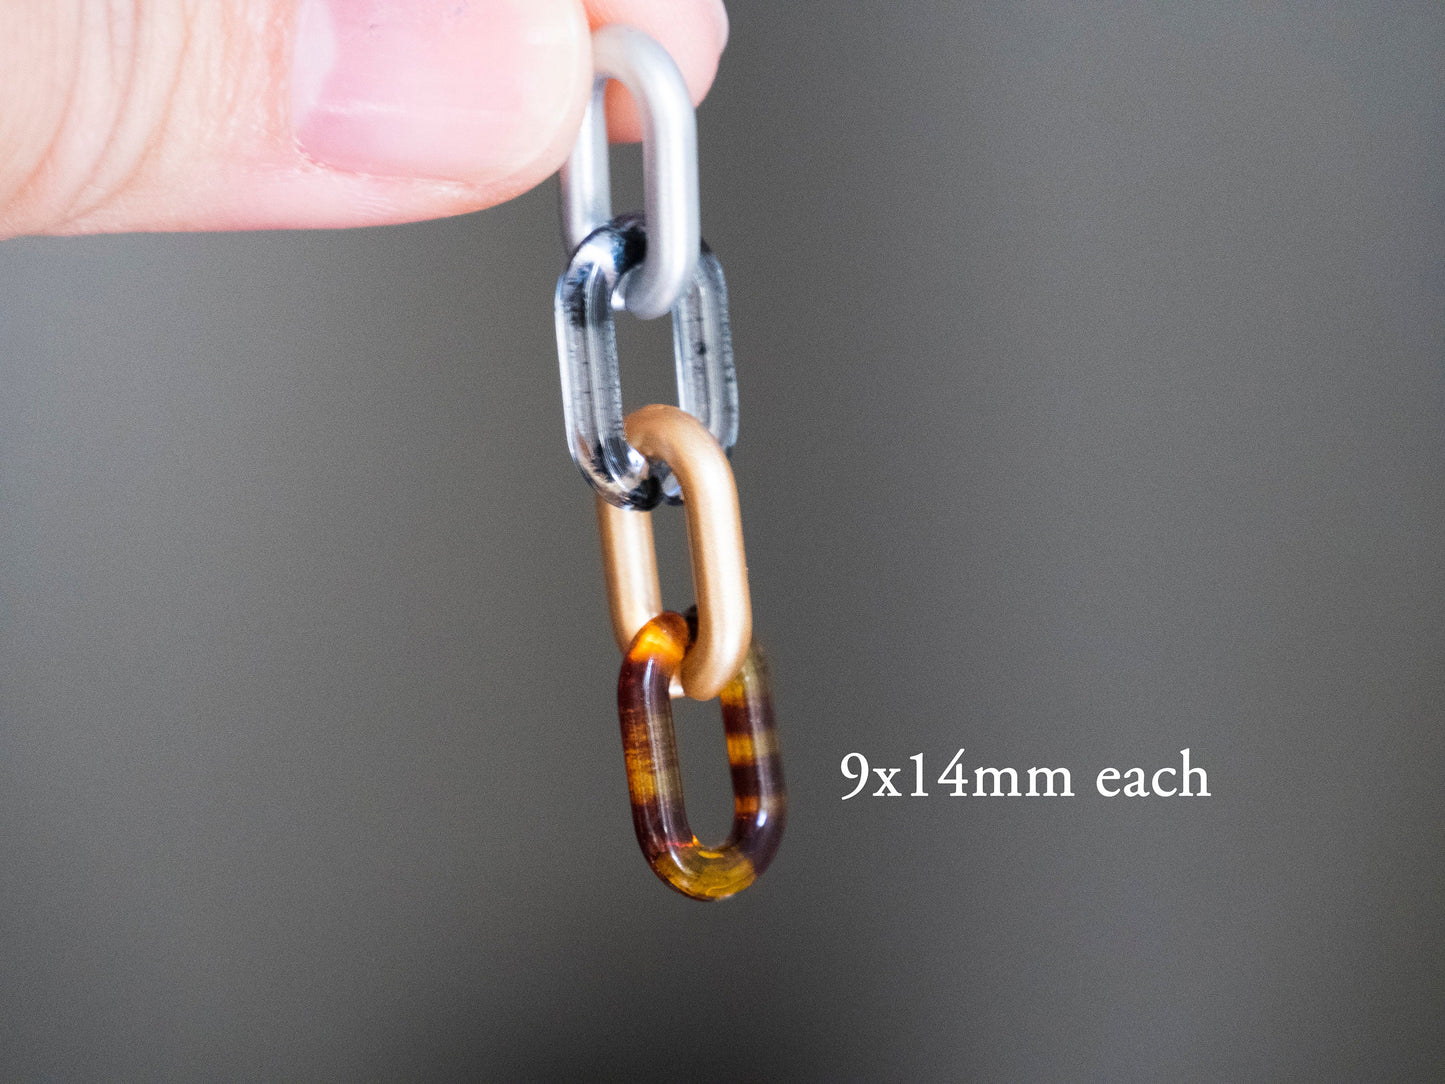 10pcs Link Studs for nails and jewelry design supply/ Plastic Candy Color Amber Solo Hook Link Chain Maker